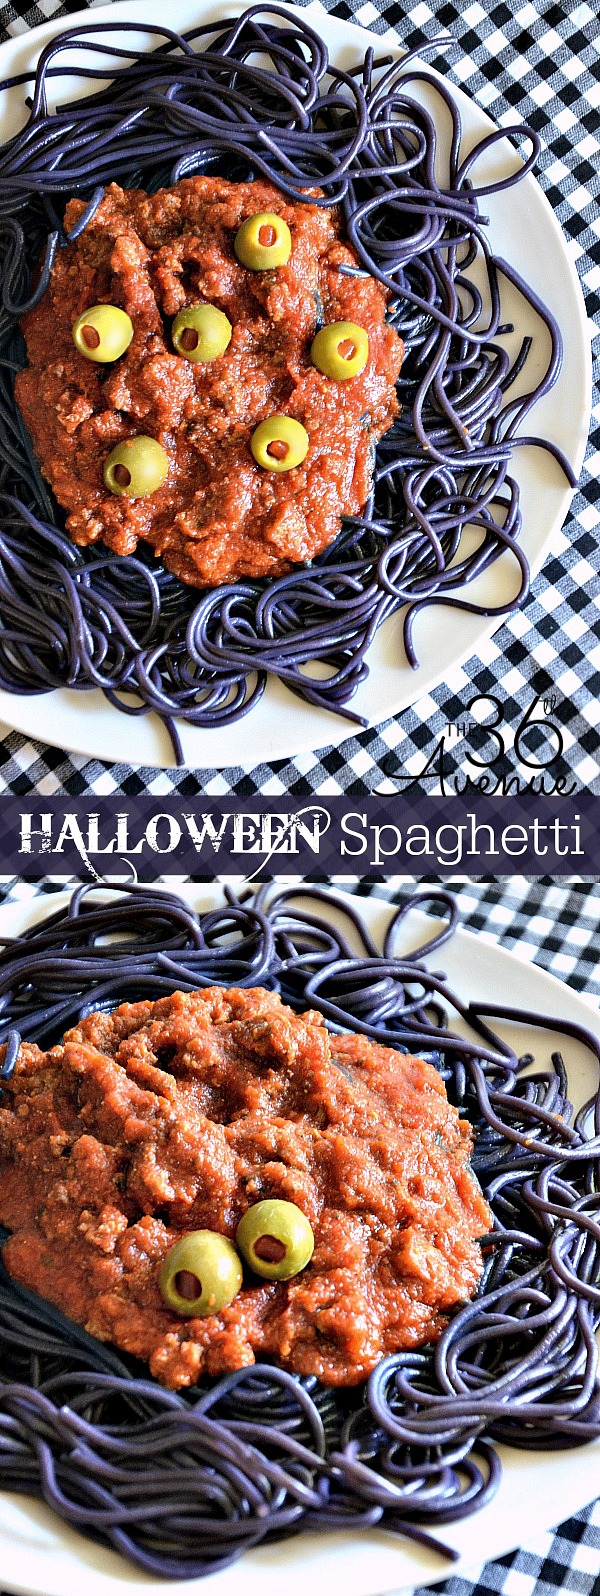 Halloween Recipe - This Halloween Spaghetti tastes delicious and looks SPOOKTACULAR! Kids love it! the36thavenue.com